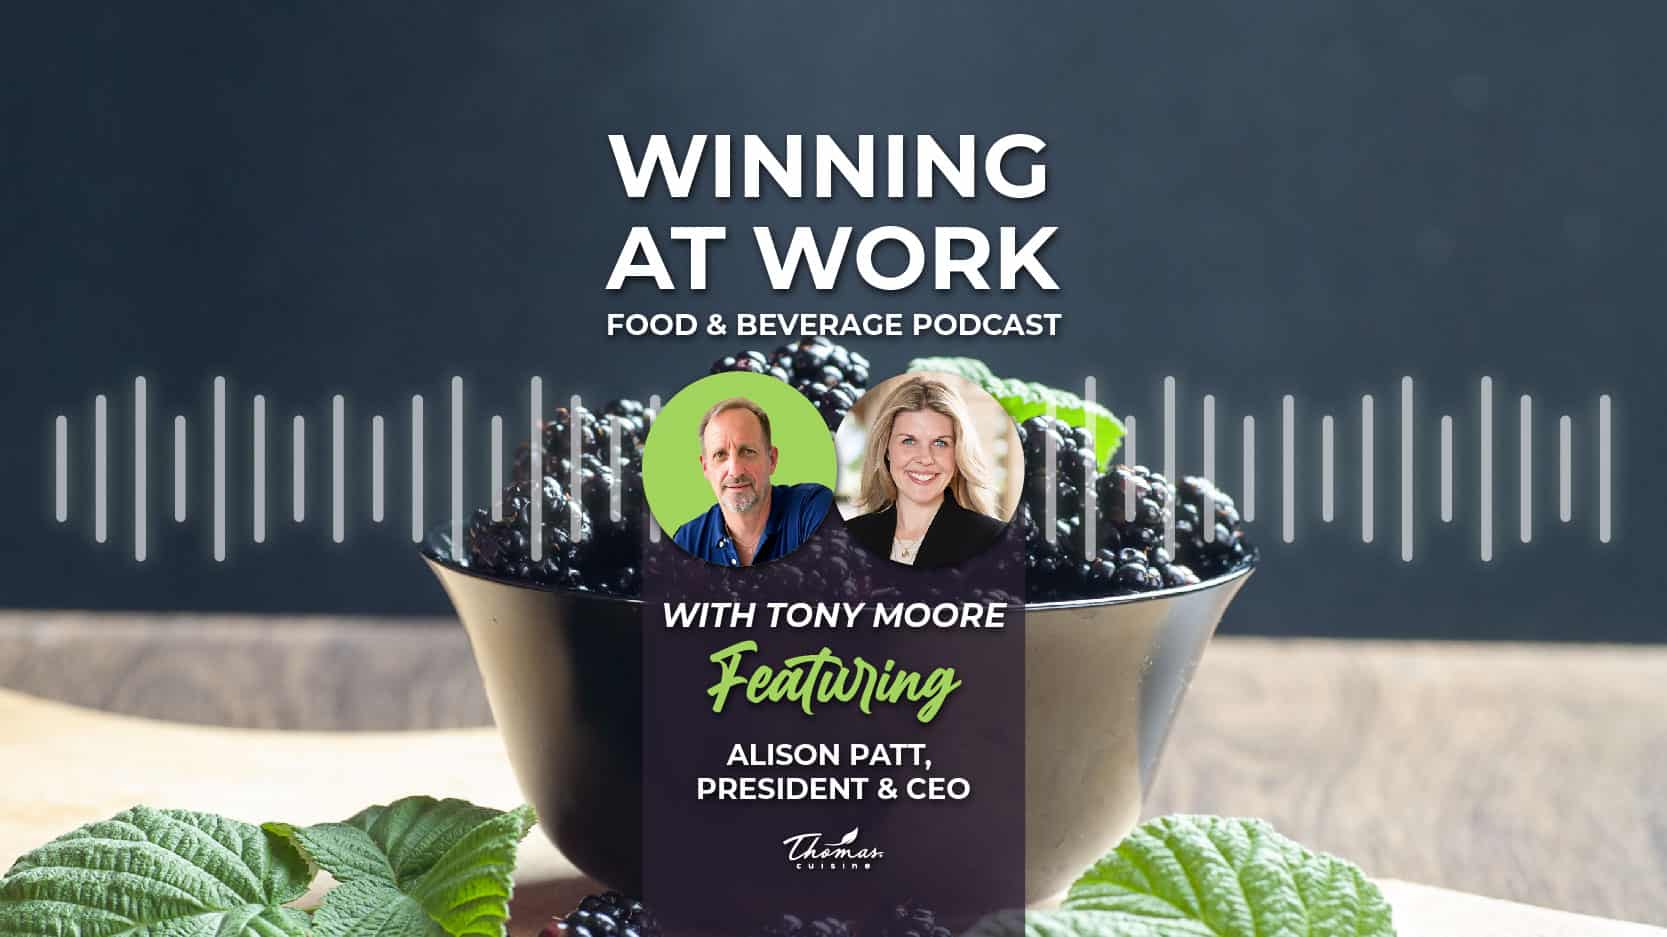 You are currently viewing Winning at Work Podcast Featuring Alison Patt, President and CEO of Thomas Cuisine